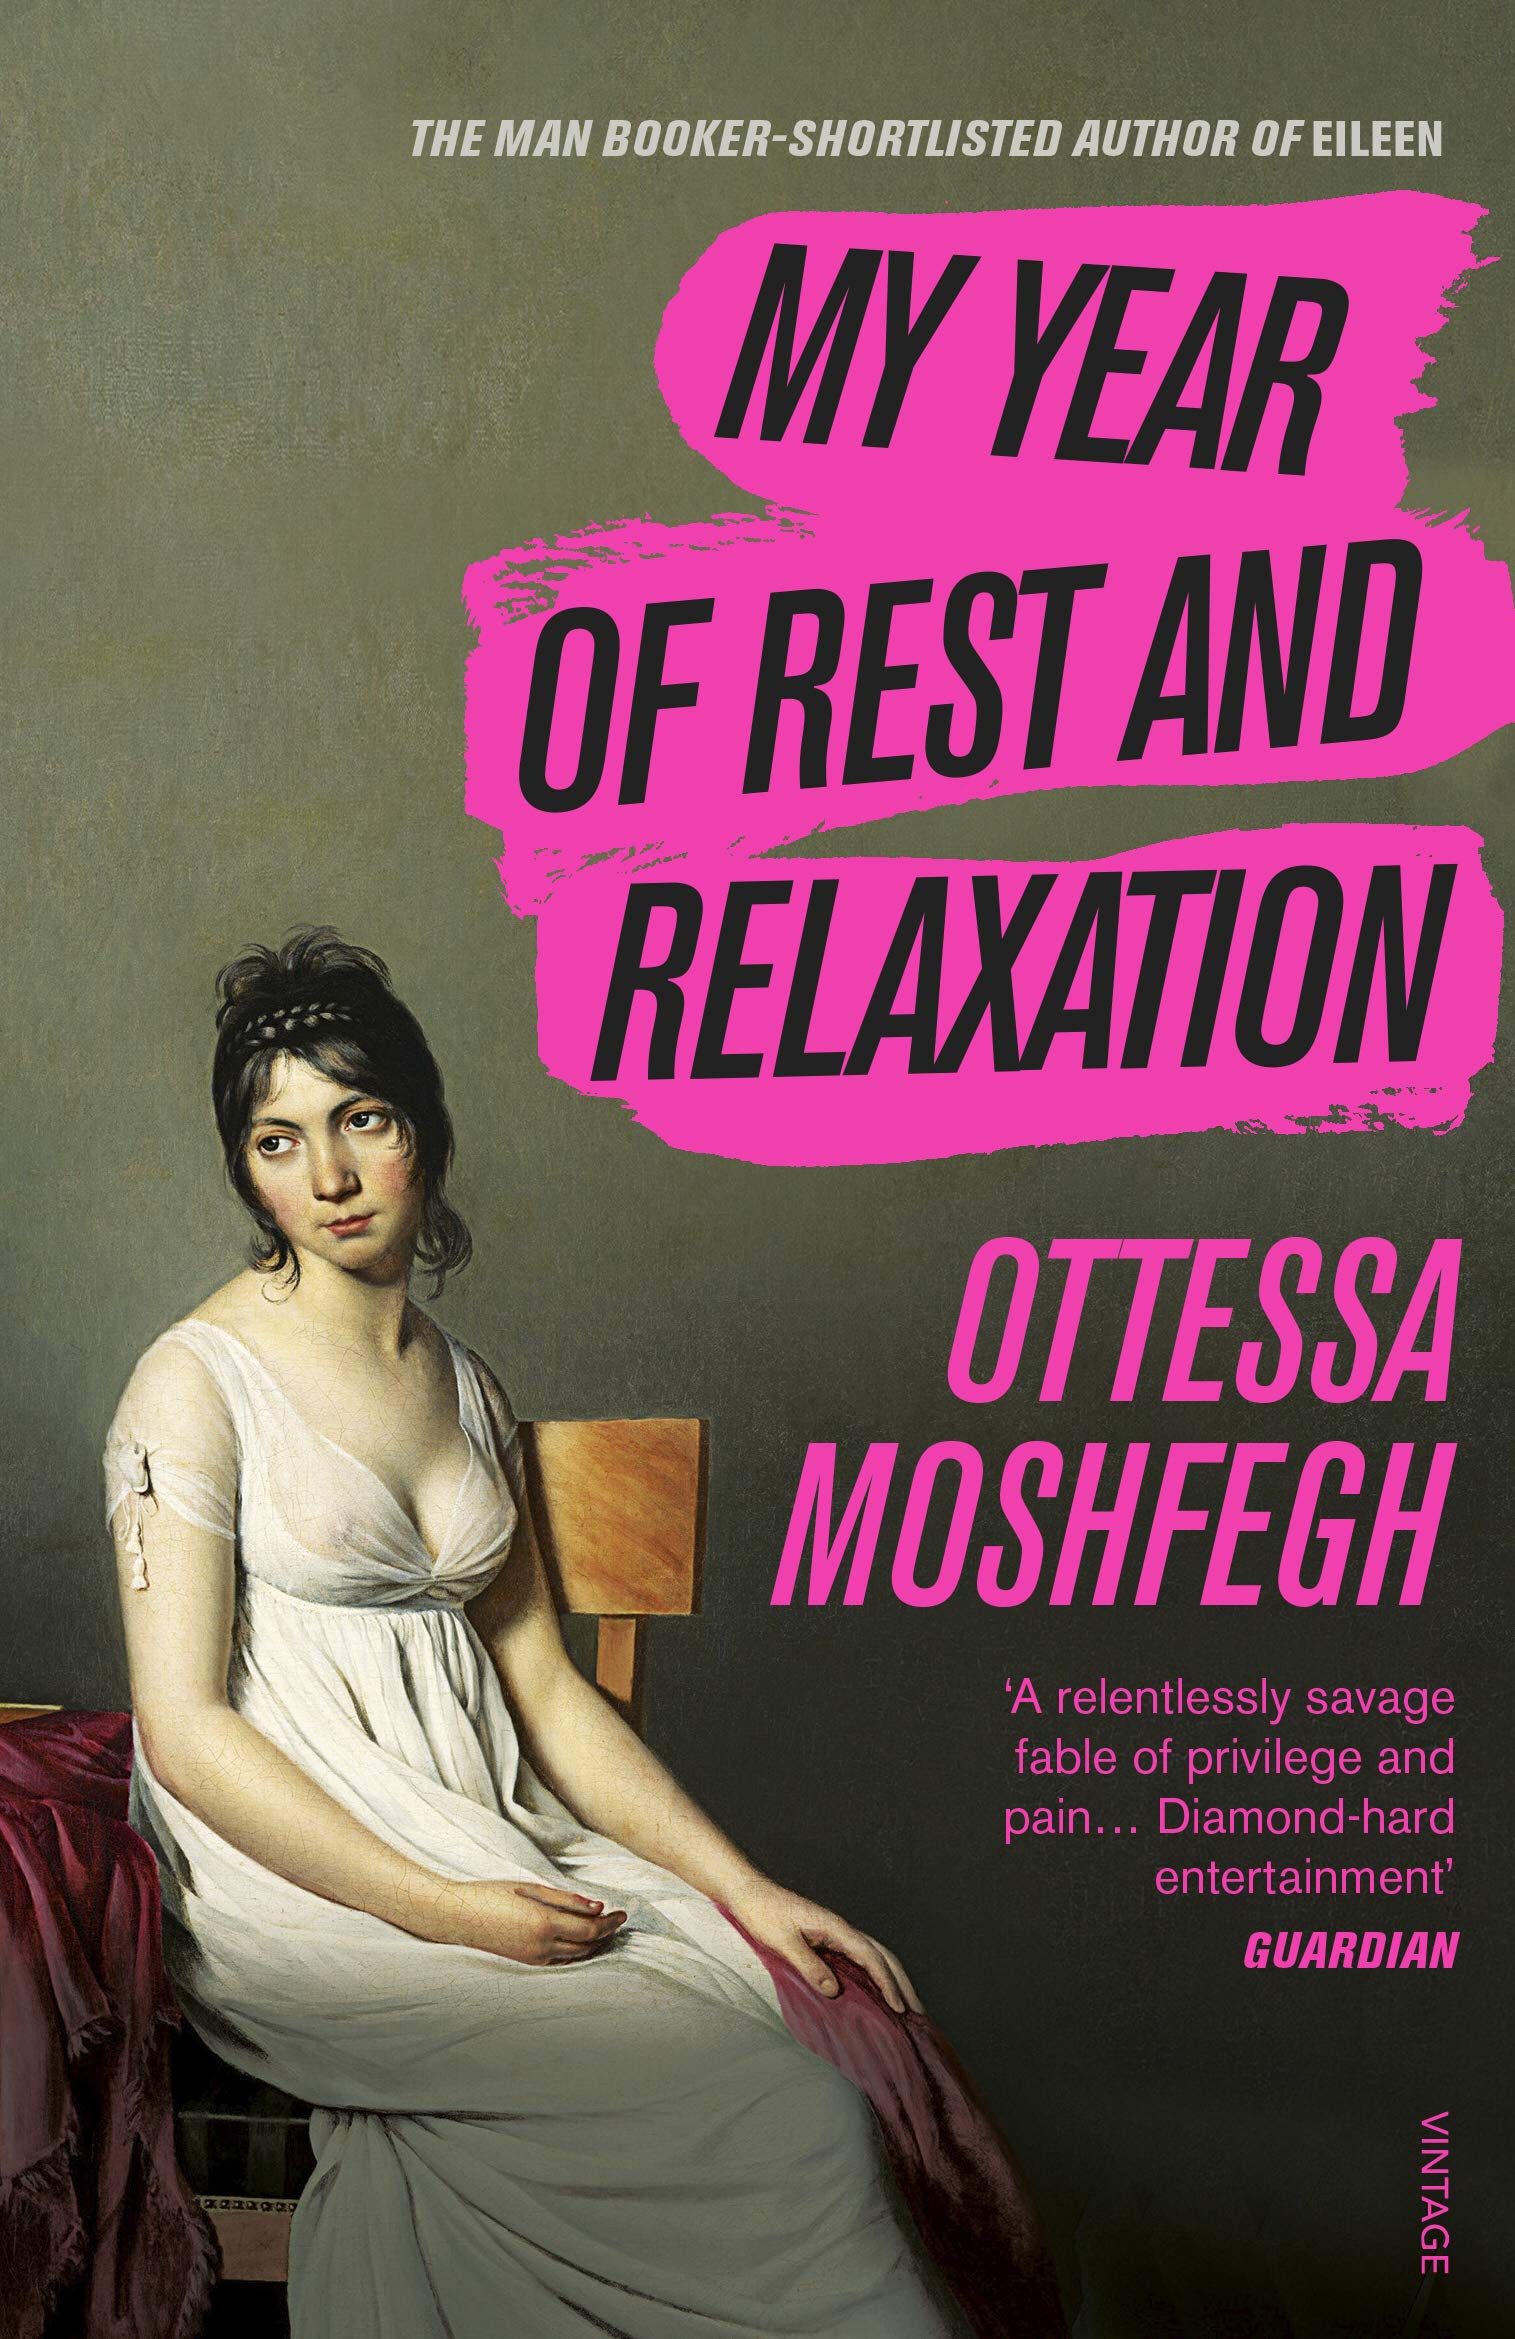 My Year of Rest and Relaxation | Ottessa Moshfegh